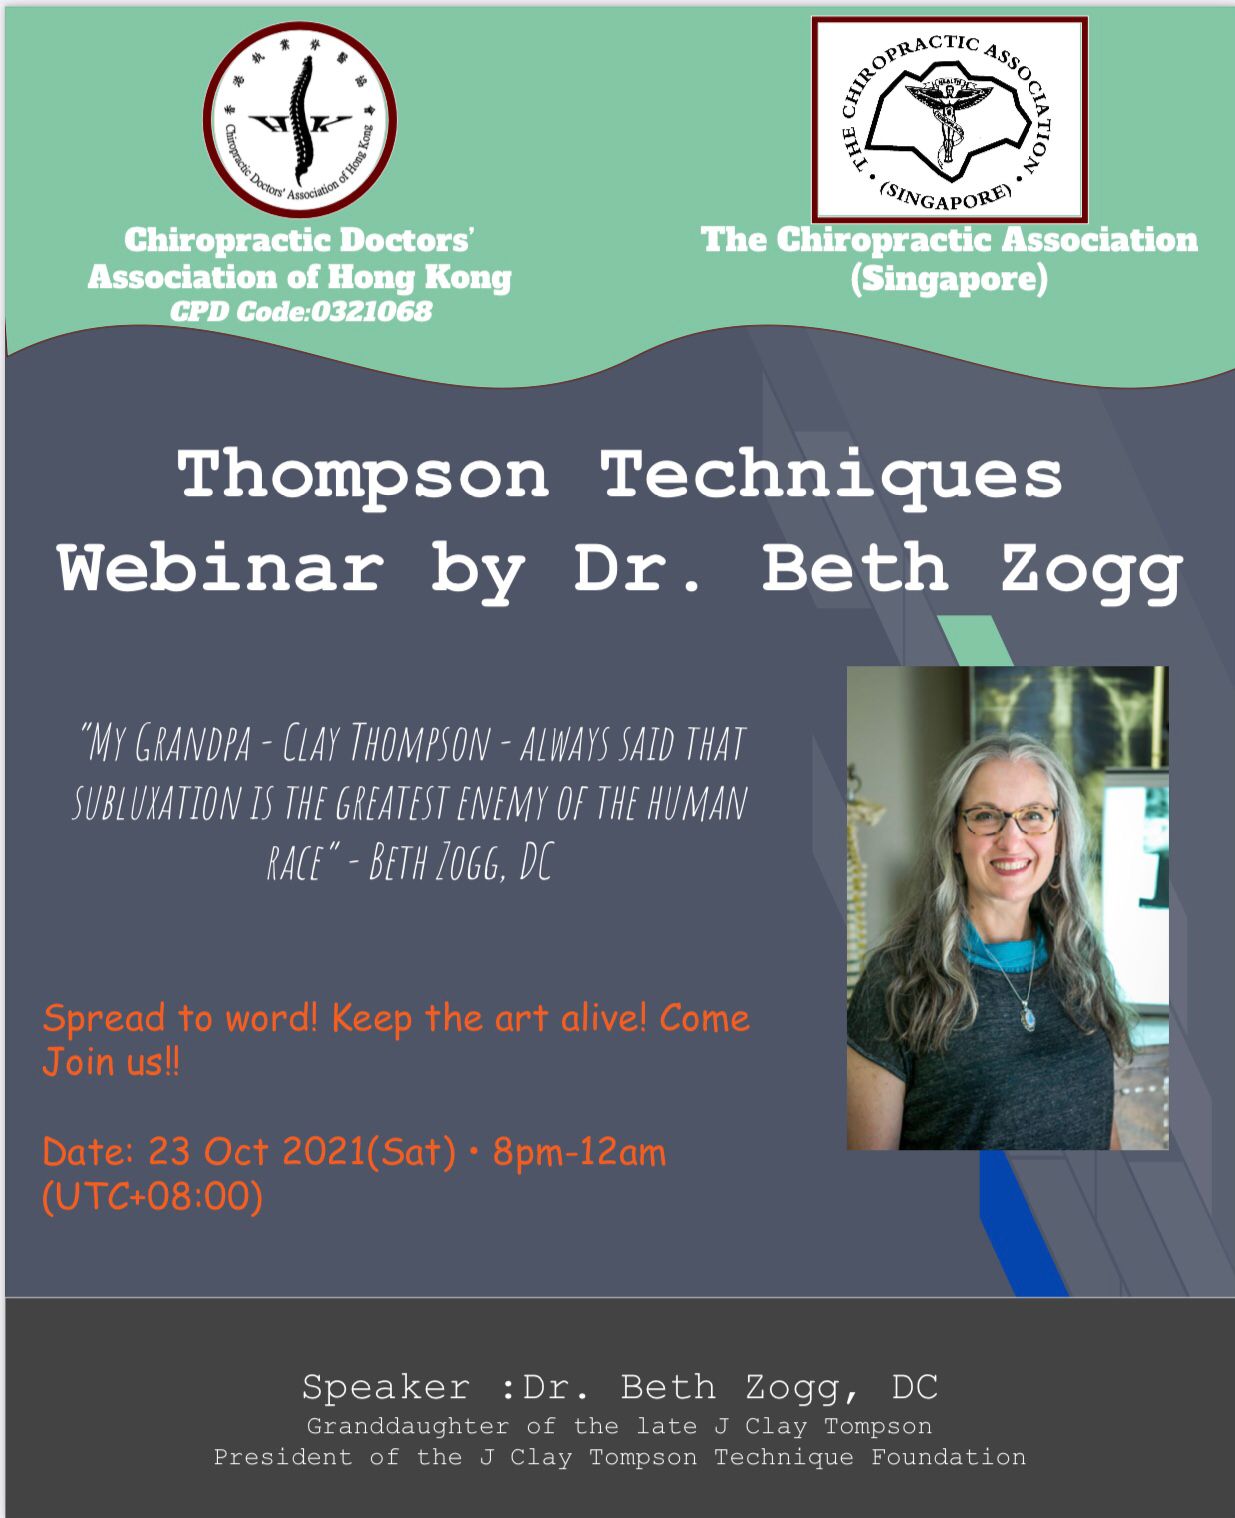 Thompson Techinique Webinar by Dr Beth Zogg 23rd Oct 2021